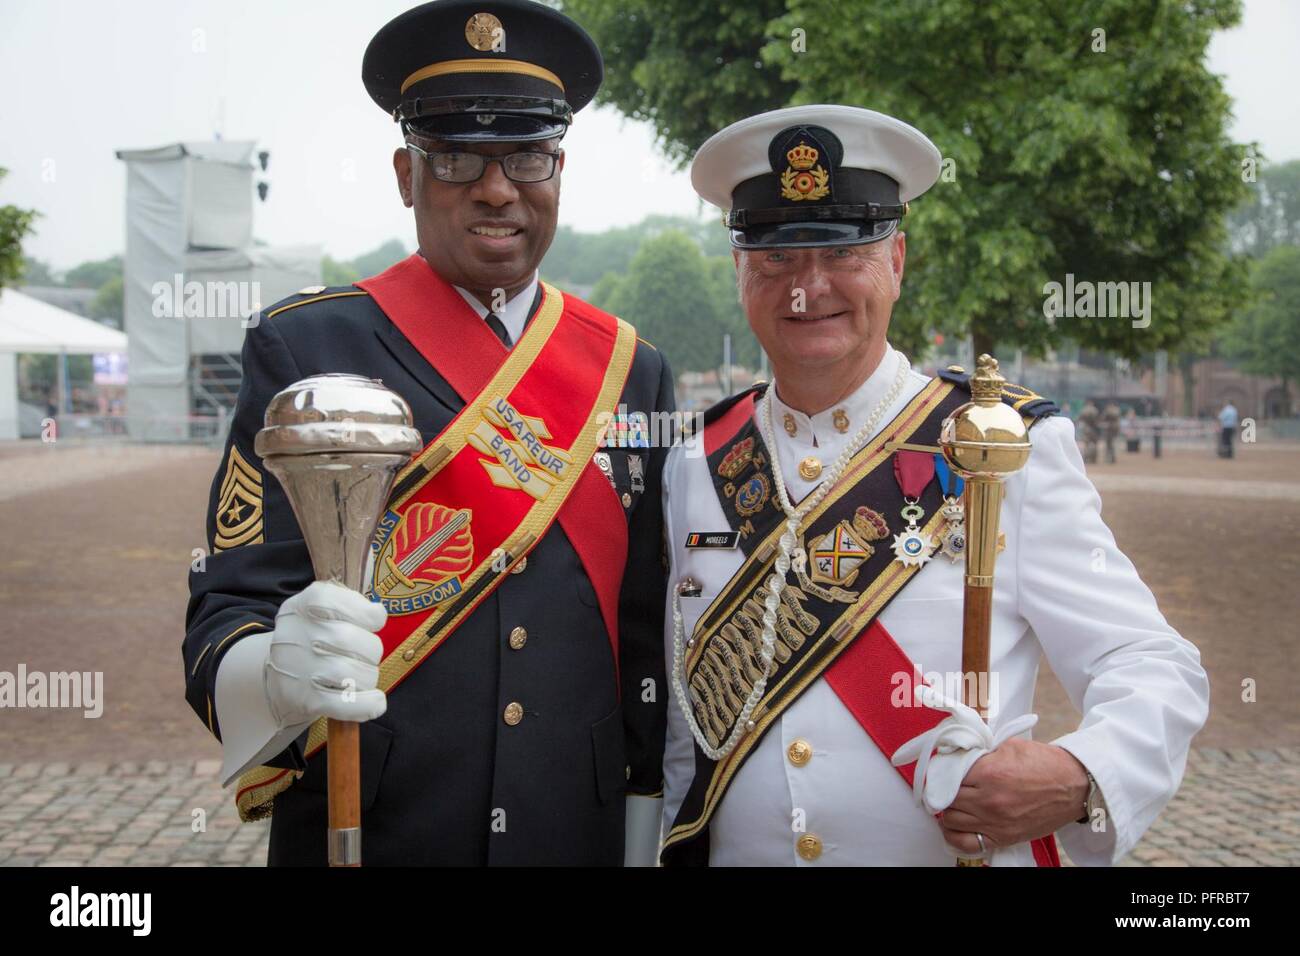 US drum major SGM Jesse L. Hughes Jr. stands alongside Major Hans Moreels of the German Heeresmusikorps during the Citadelle 350 anniversary military show, May 25, 2018.  US Army Stock Photo